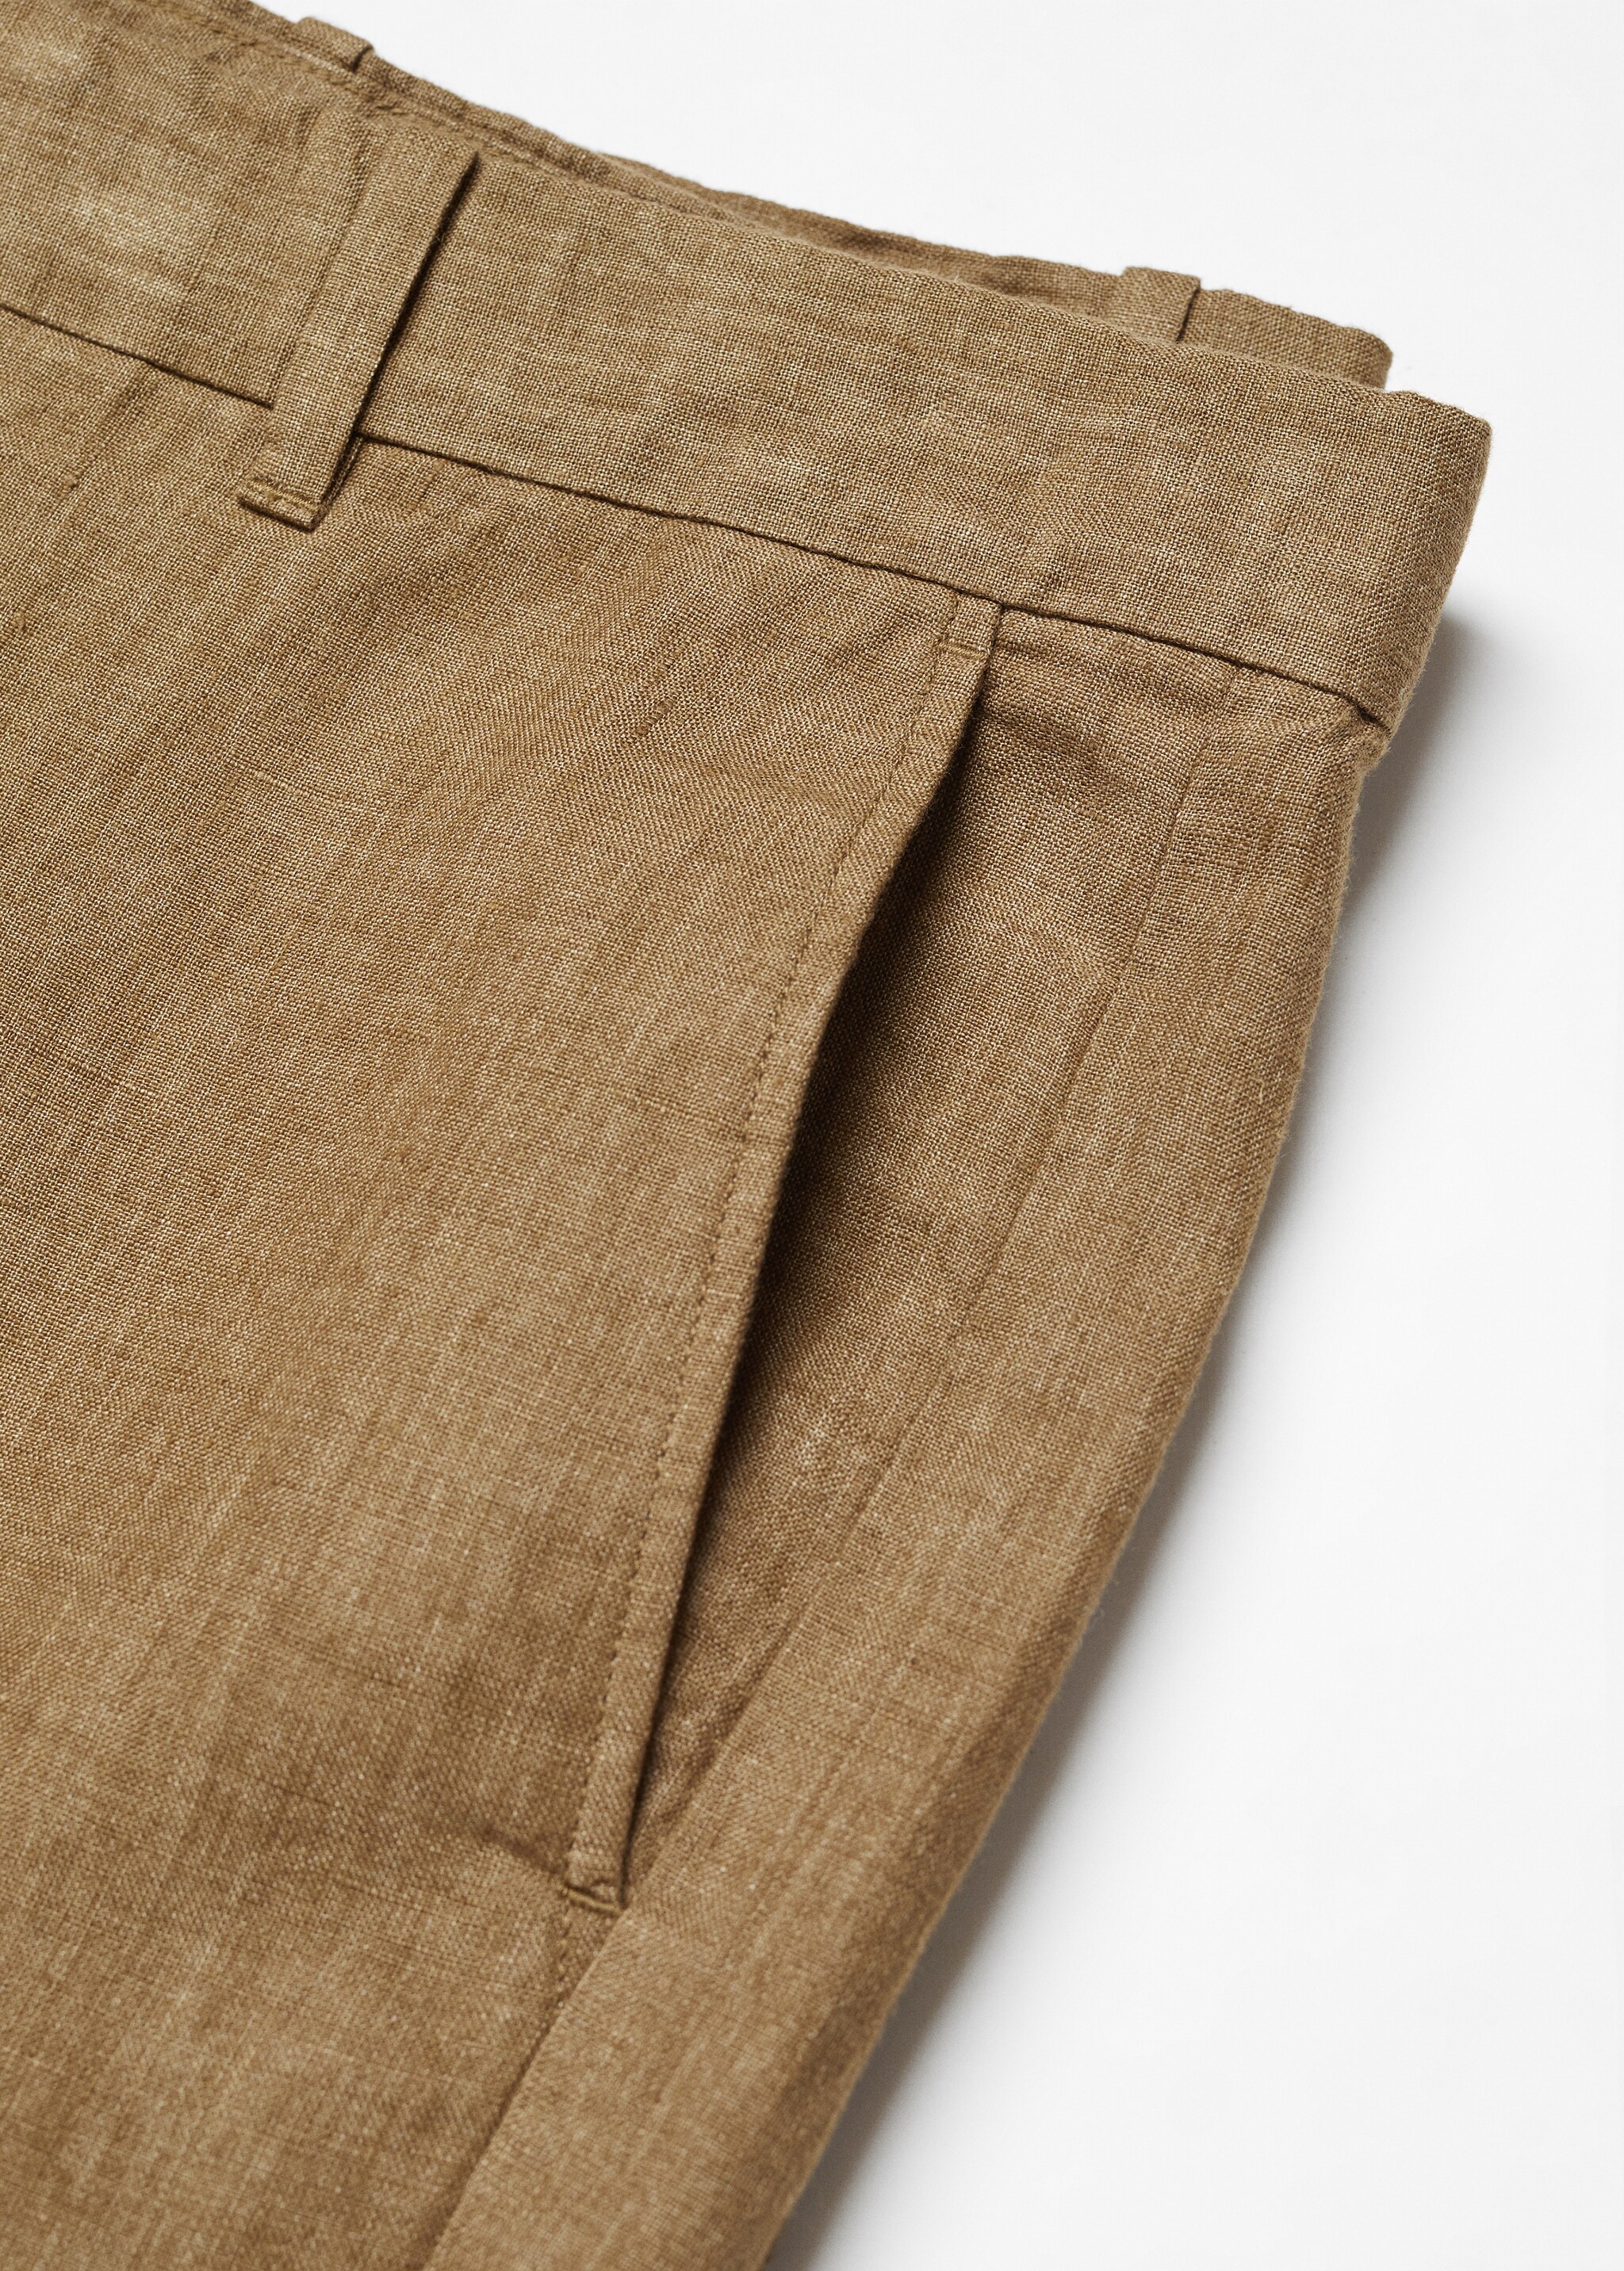 100% linen shorts - Details of the article 8